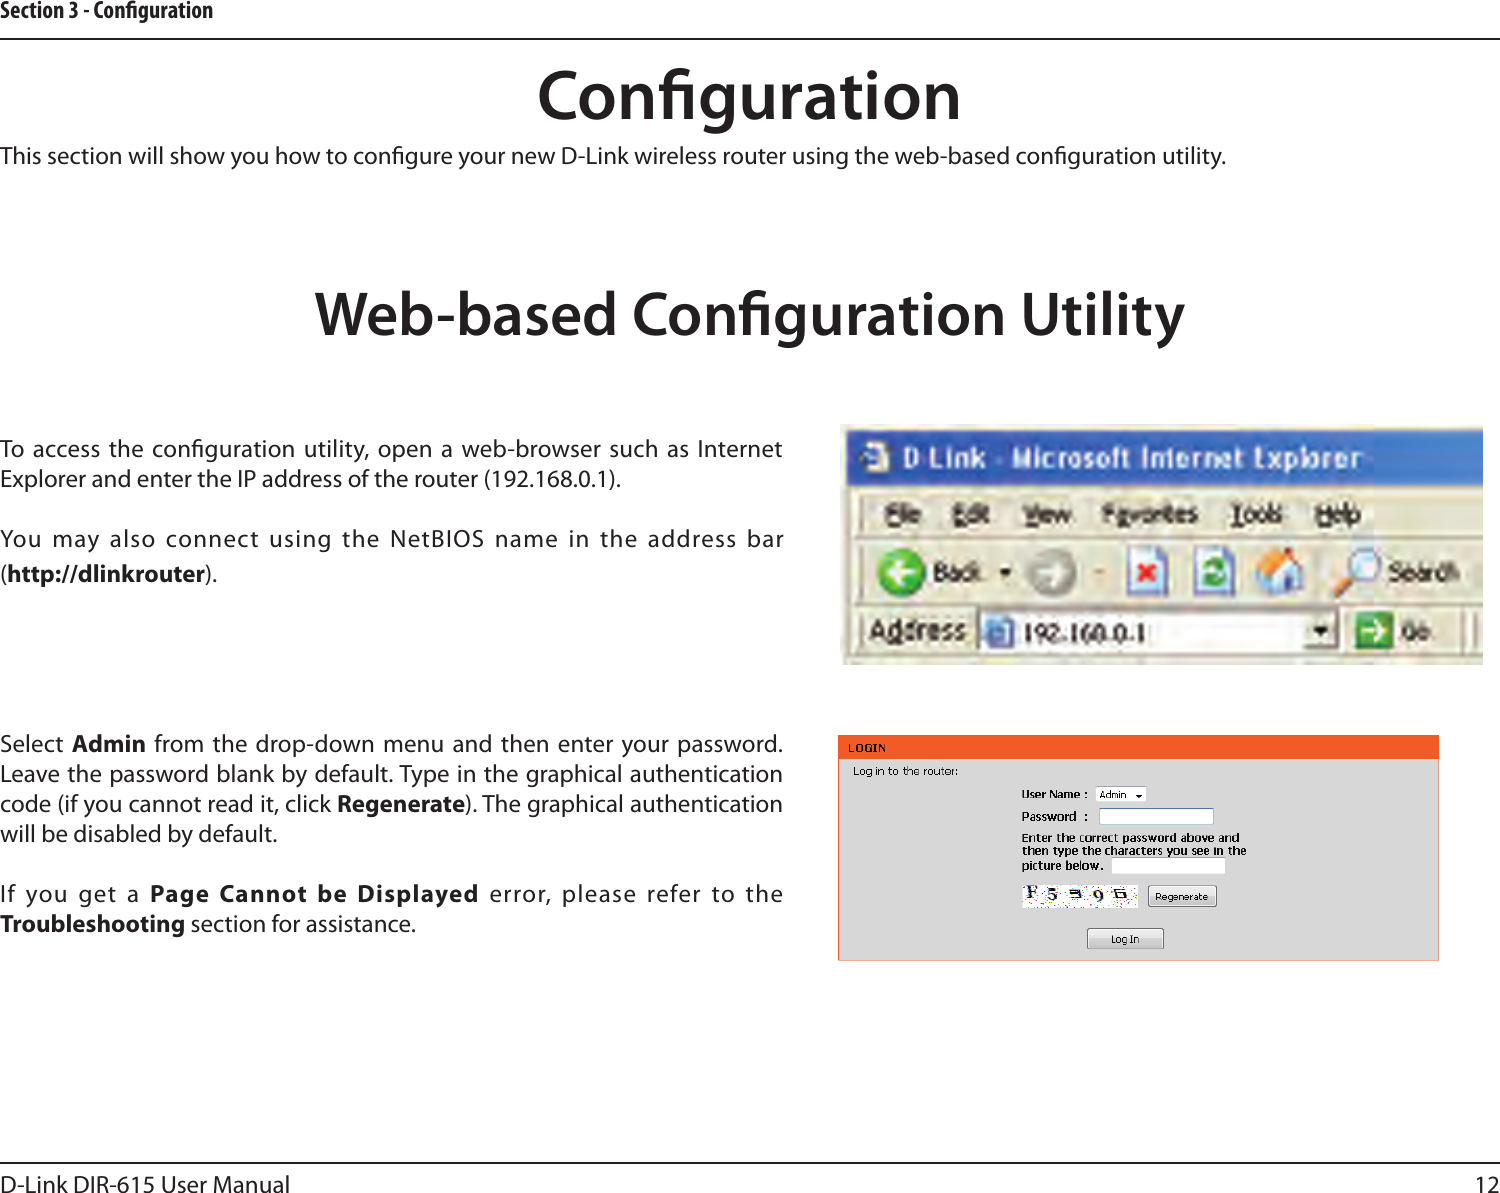 12D-Link DIR-615 User ManualSection 3 - CongurationCongurationThis section will show you how to congure your new D-Link wireless router using the web-based conguration utility.Web-based Conguration UtilityTo access the conguration utility, open a web-browser such as Internet Explorer and enter the IP address of the router (192.168.0.1).You  may also connect using the NetBIOS name  in the address bar (http://dlinkrouter).Select  Admin from the drop-down menu  and then enter your password. Leave the password blank by default. Type in the graphical authentication code (if you cannot read it, click Regenerate). The graphical authentication will be disabled by default.If  you get a Page  Cannot  be  Displayed  error, please  refer to the Troubleshooting section for assistance.